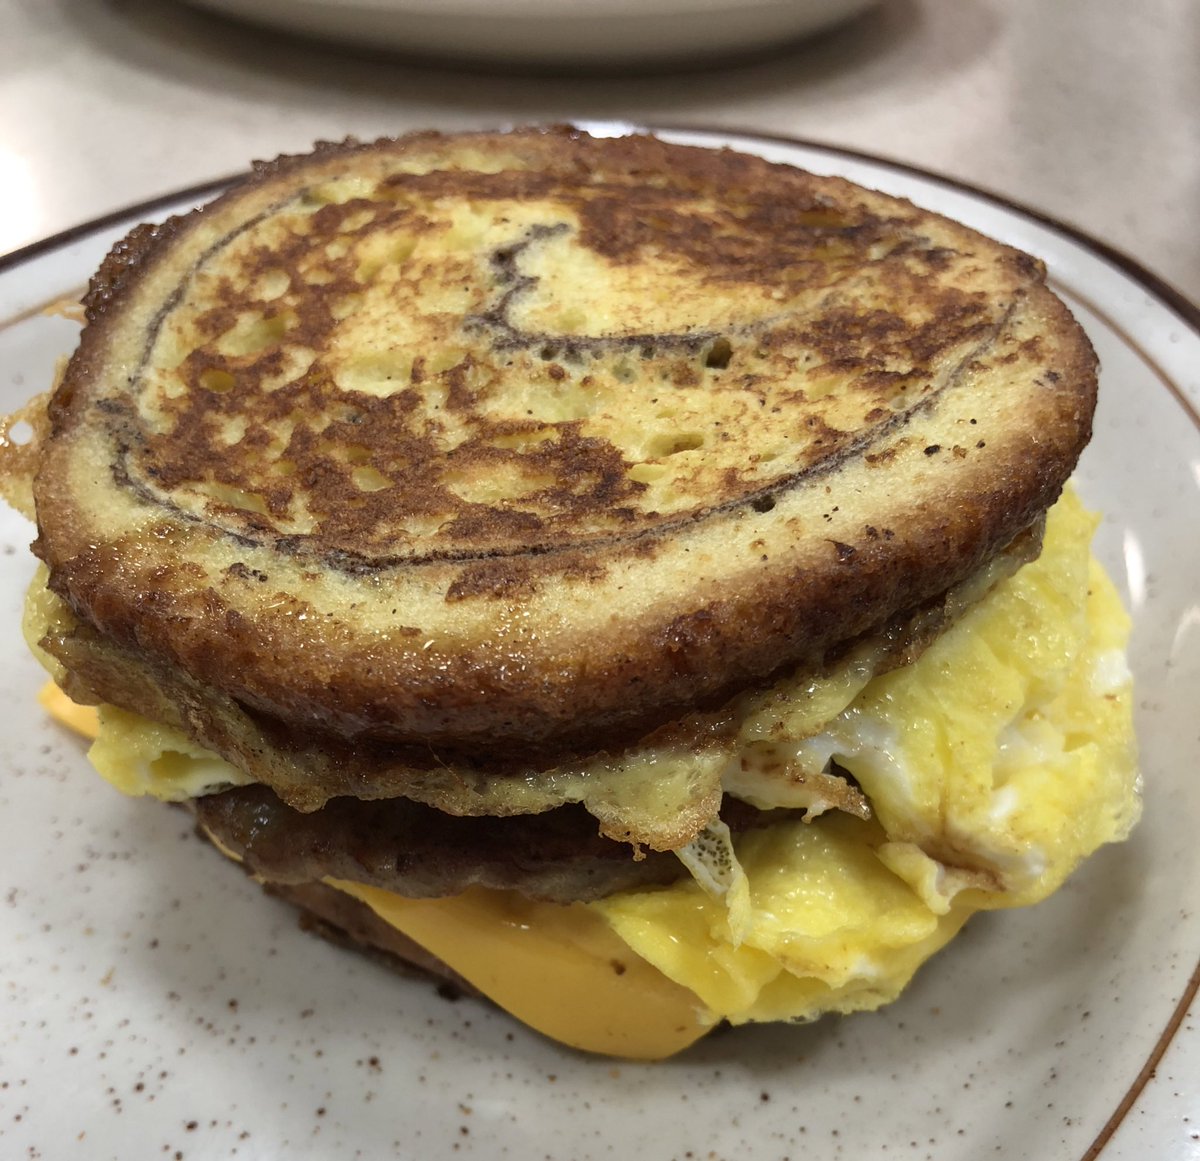 Have you tried our Cinnamon Swirl Egg Sandwich? Egg, sausage and cheese with the bread French toasted, this is the ultimate breakfast sandwich. #frenchtoast #breakfast #eggs #cheese #food #restaurant #sausage #leosconeyisland #savory